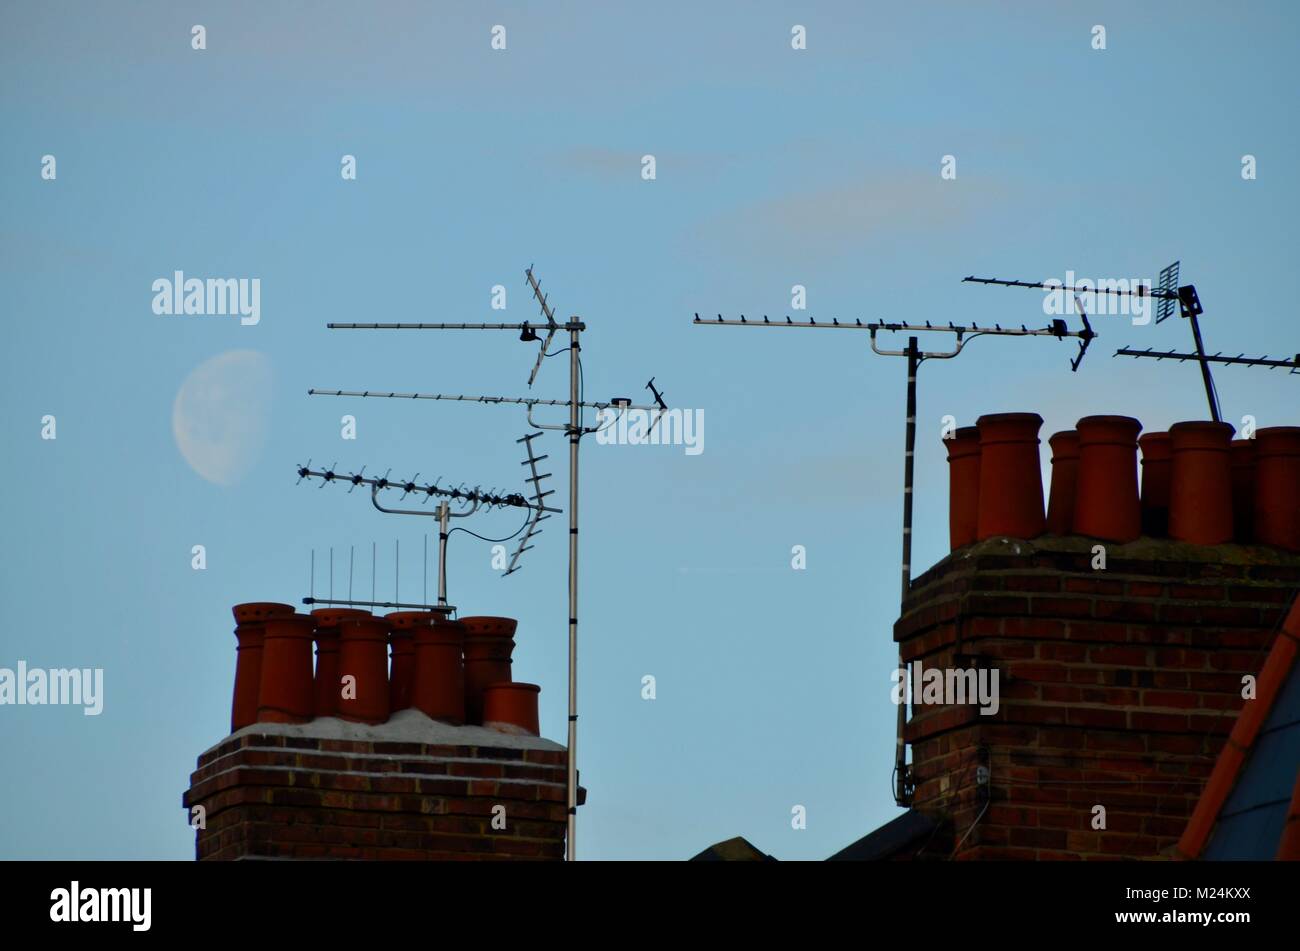 aerials and chimneys on london houses with a large moon behind Stock Photo